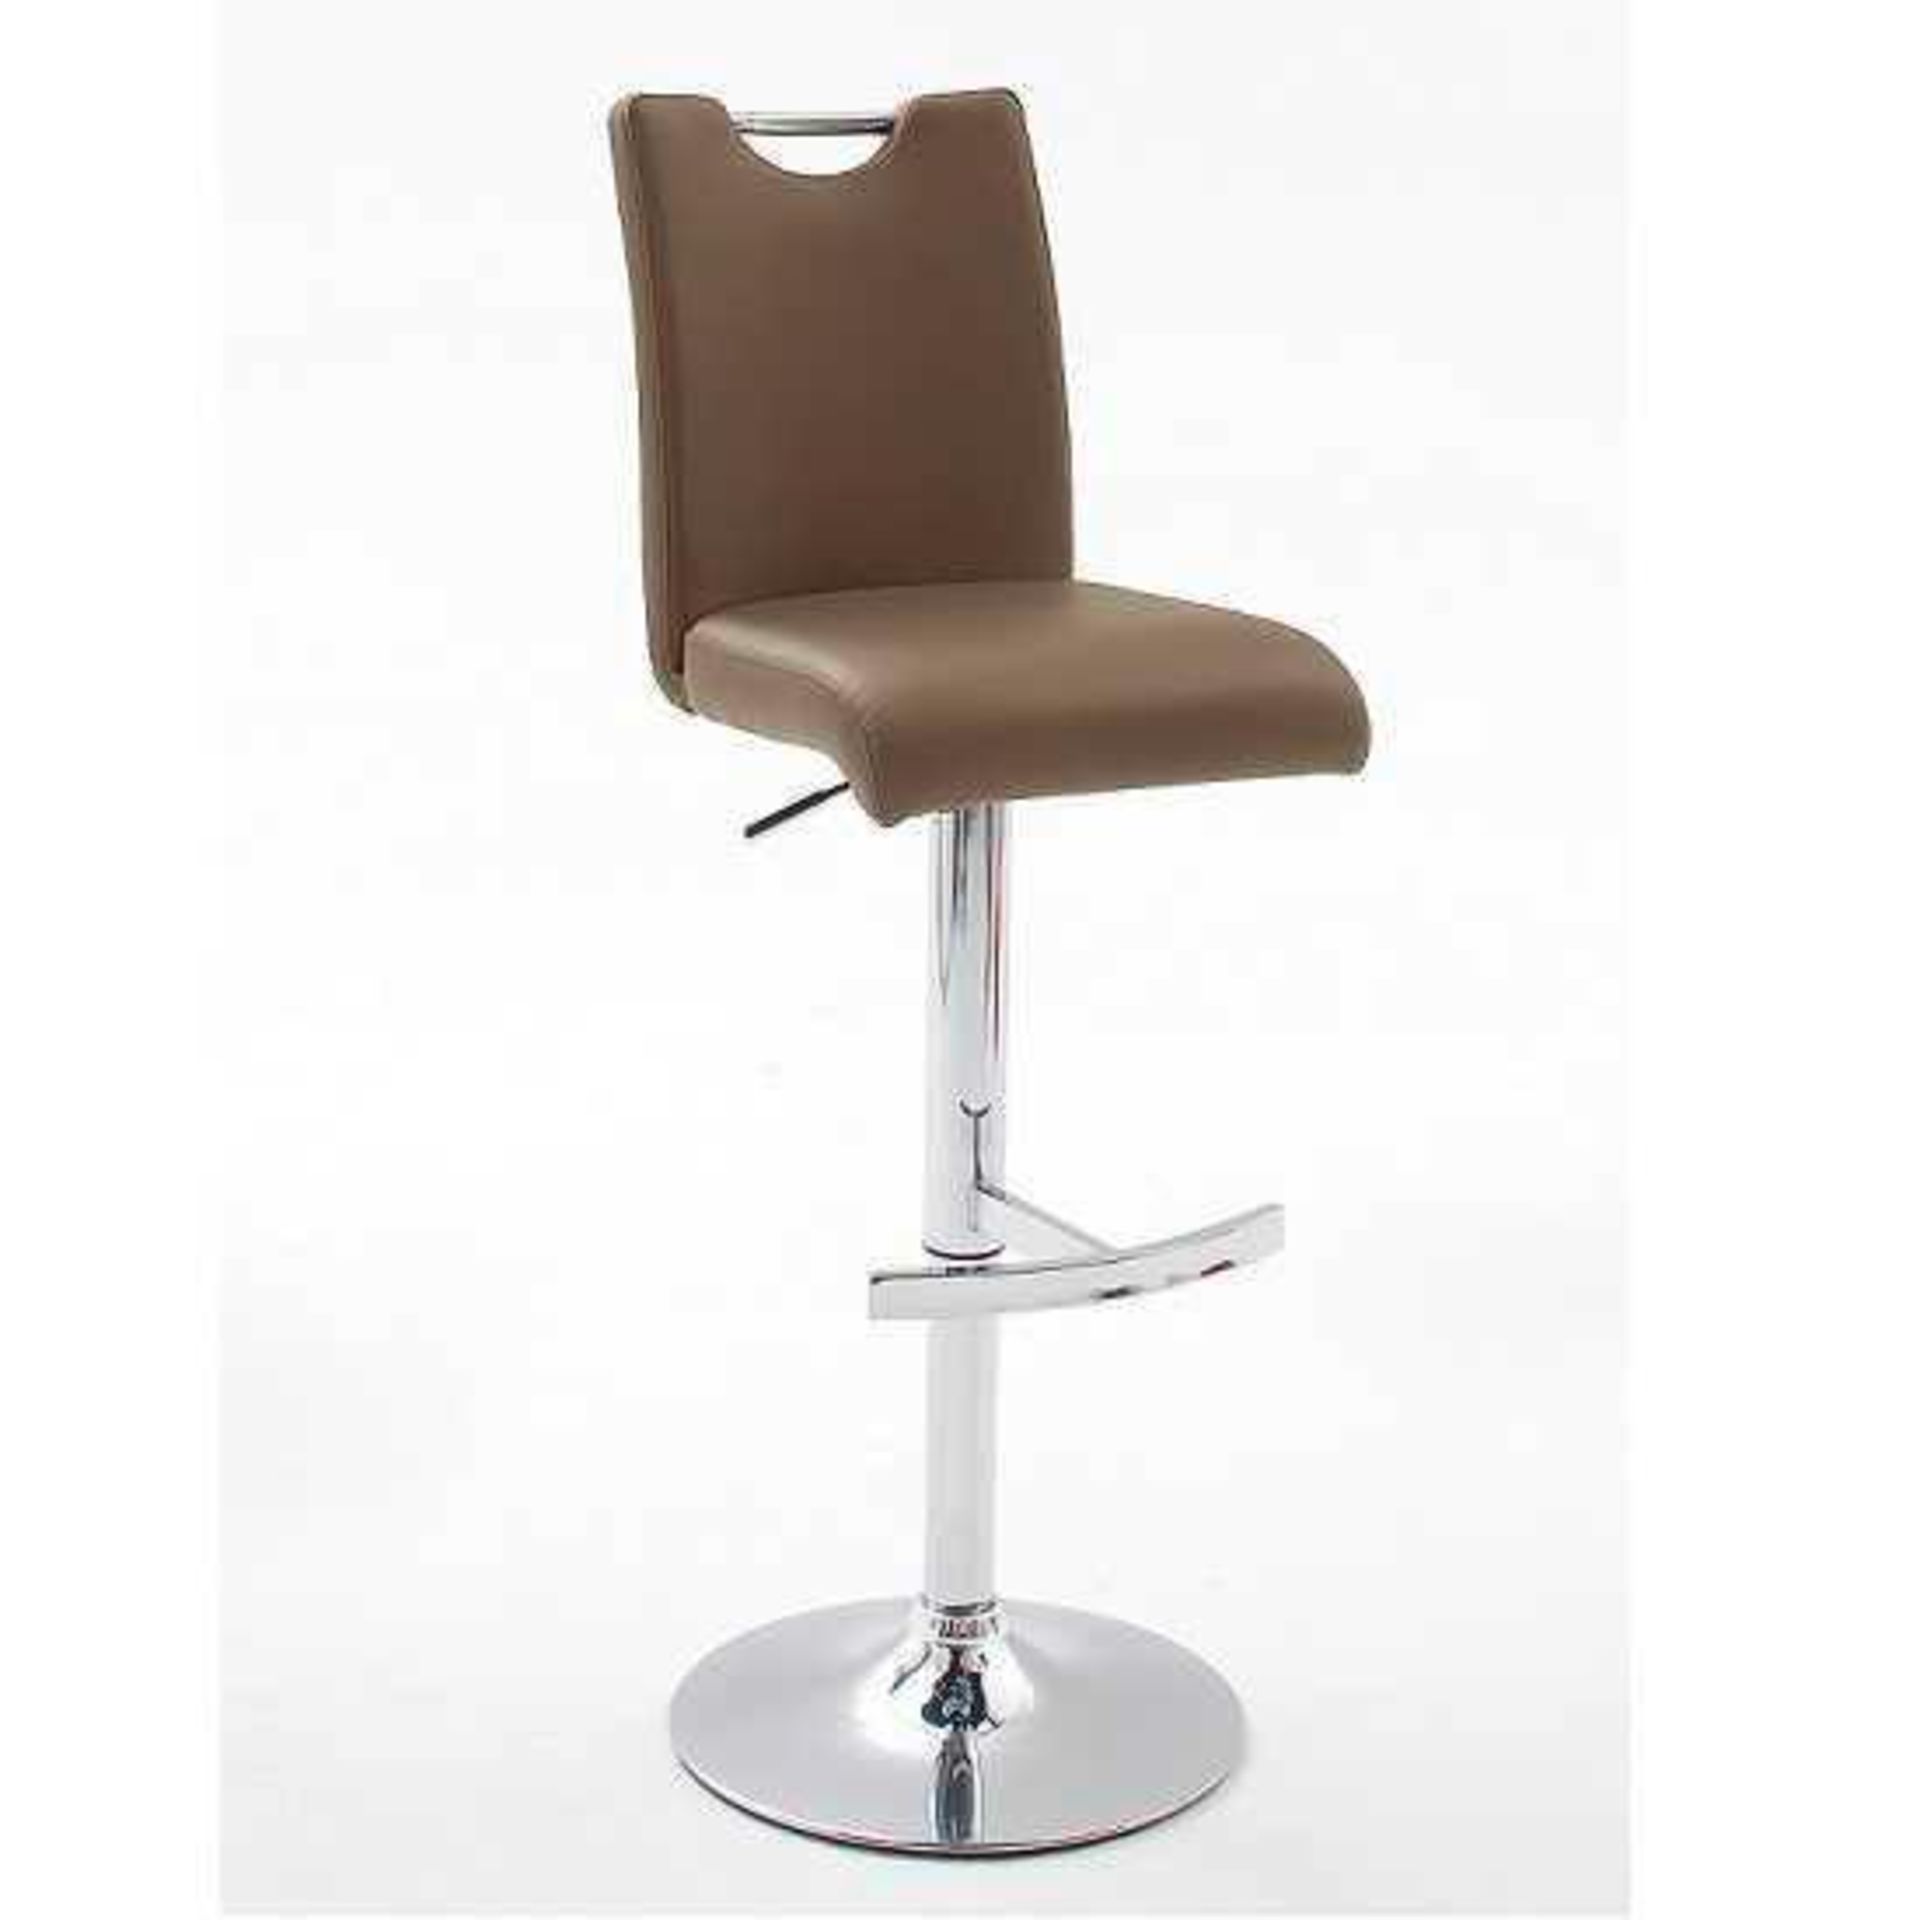 RRP £200 - Boxed 2 'Aachen' Barstools In Cappuccino Faux Leather With Chrome Base